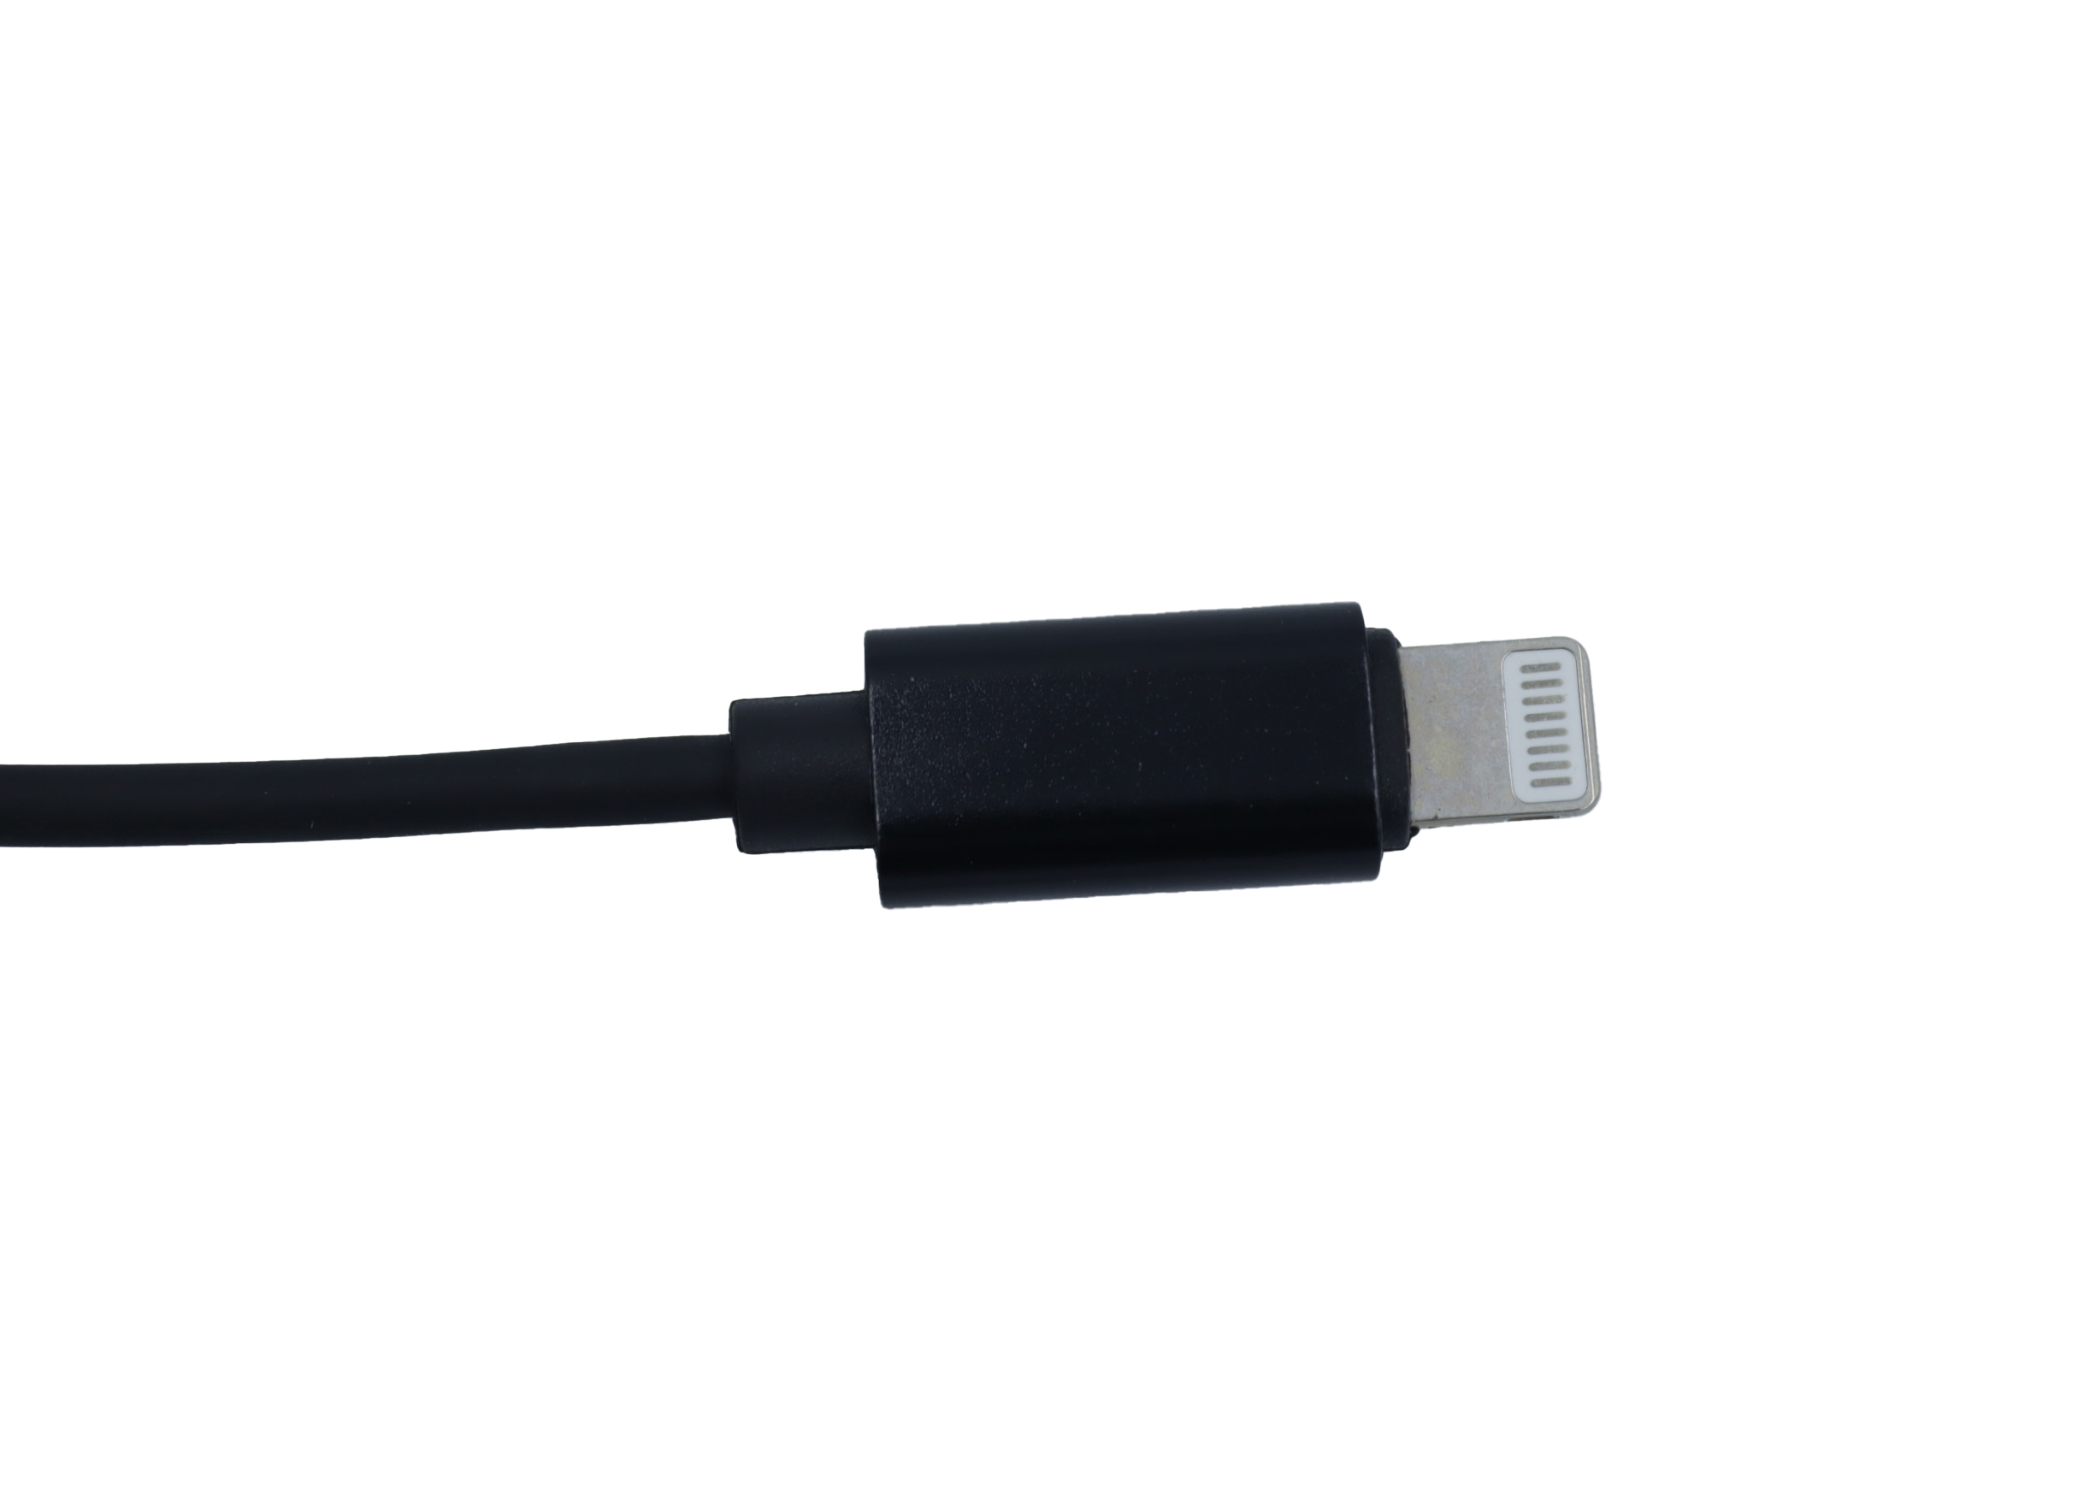 iPhone Rapid Charging And Data Cable